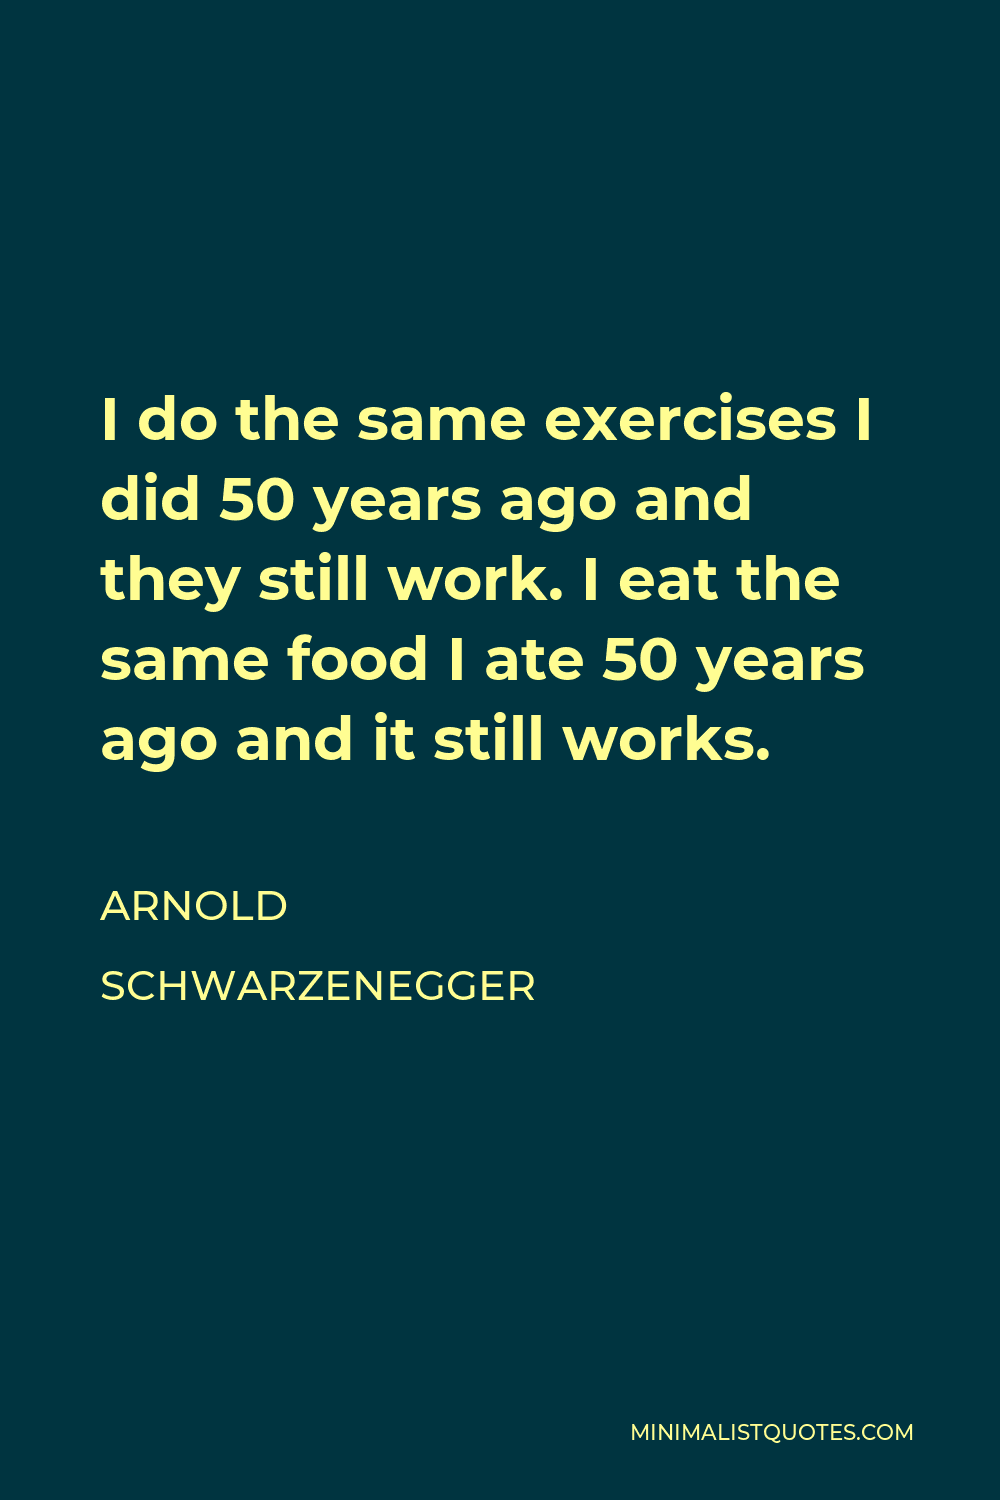 Arnold Schwarzenegger Quote - I do the same exercises I did 50 years ago and they still work. I eat the same food I ate 50 years ago and it still works.